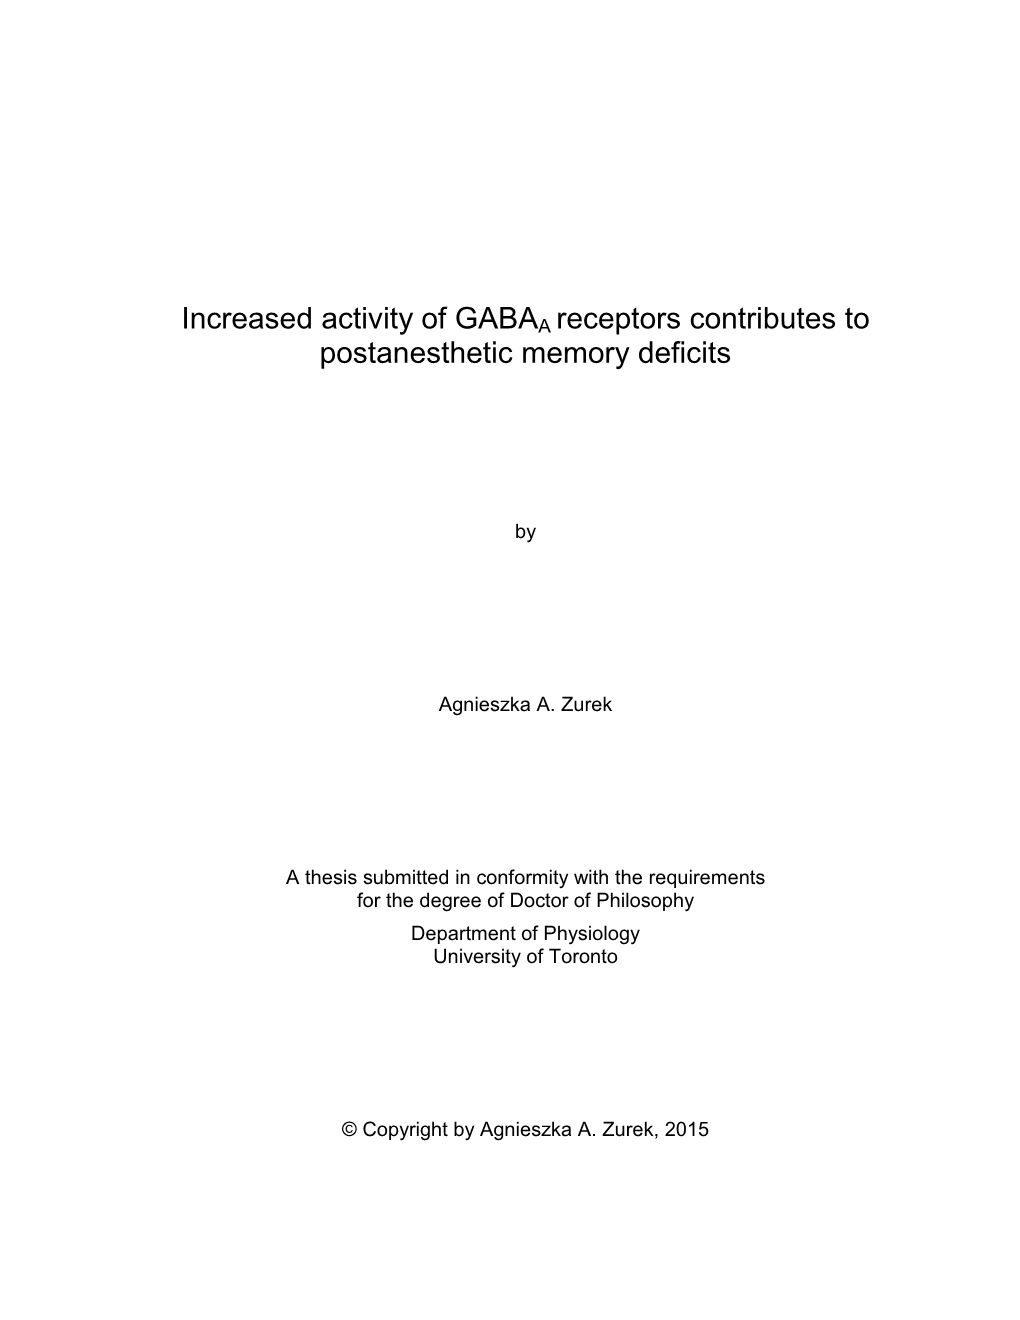 Increased Activity of GABAA Receptors Contributes to Postanesthetic Memory Deficits